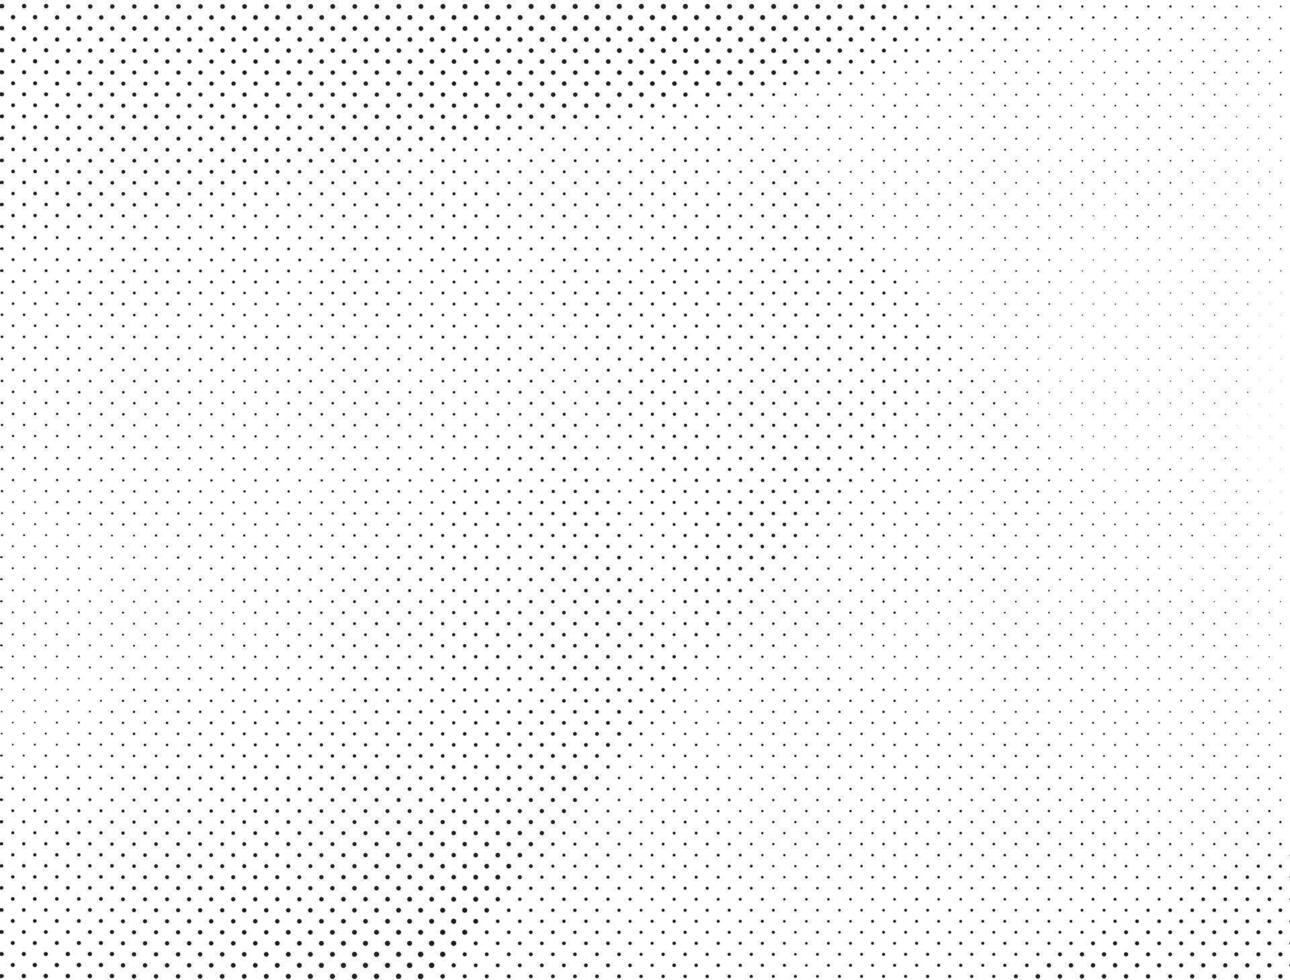 Abstract halftone design decorative background Free Vector